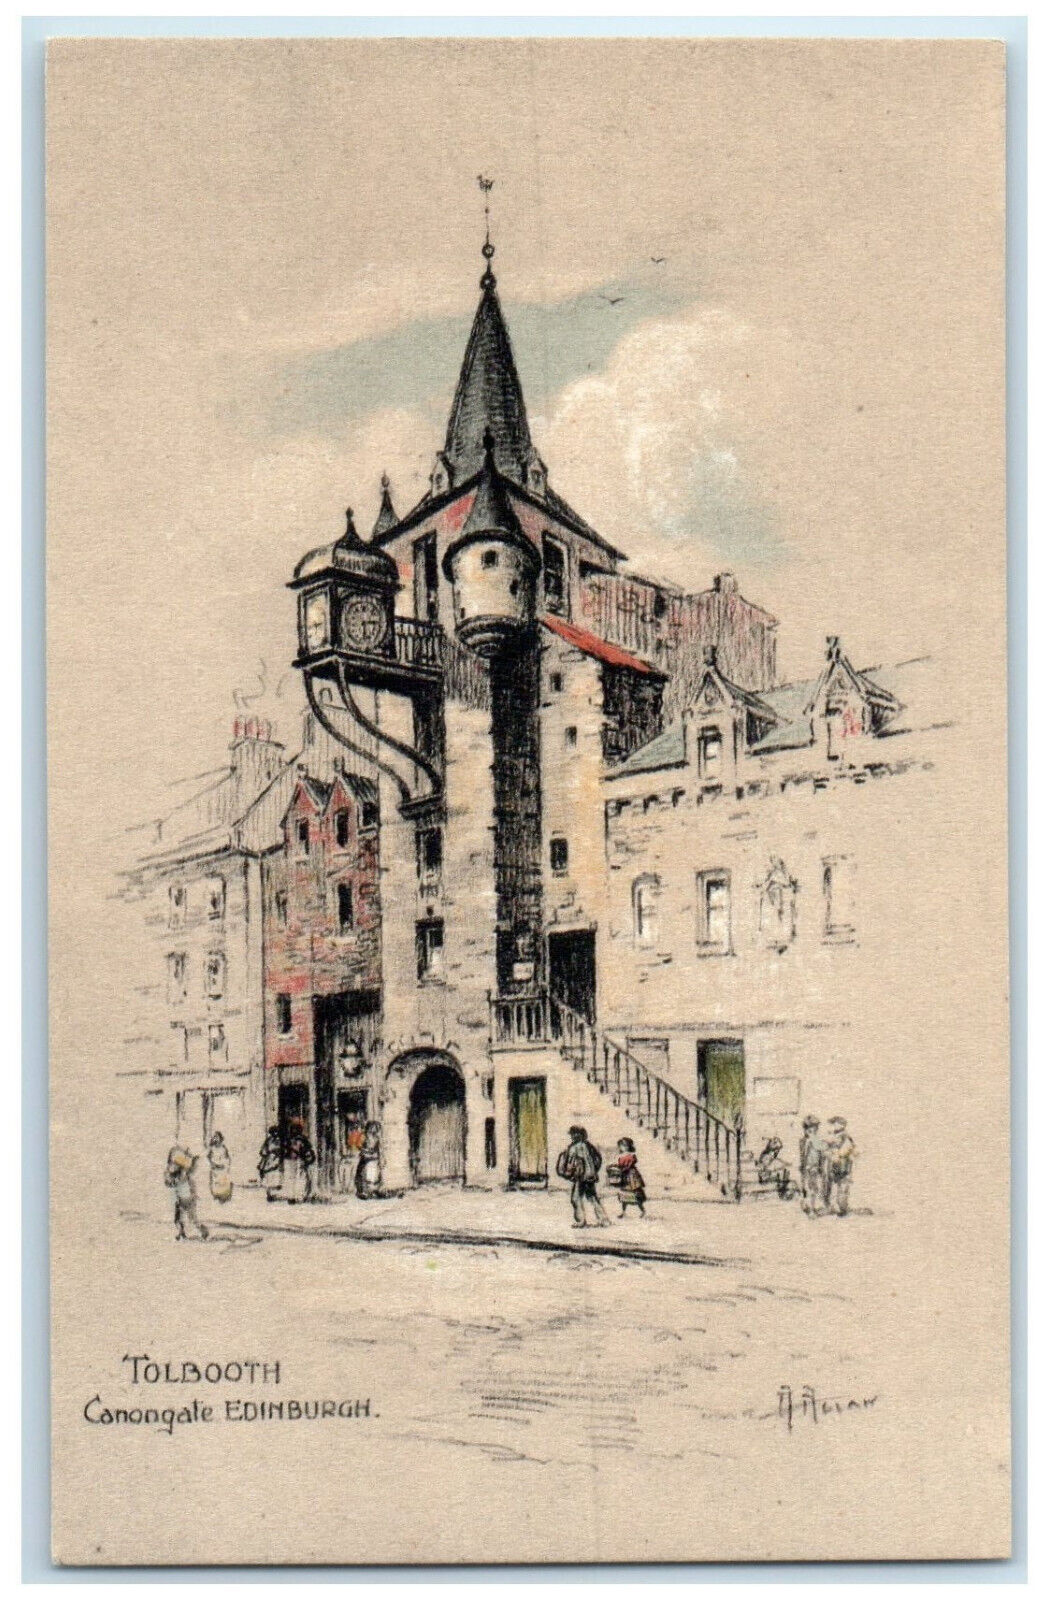 1935 View of Tolbooth Canongate Edinburgh Scotland Vintage Posted Postcard